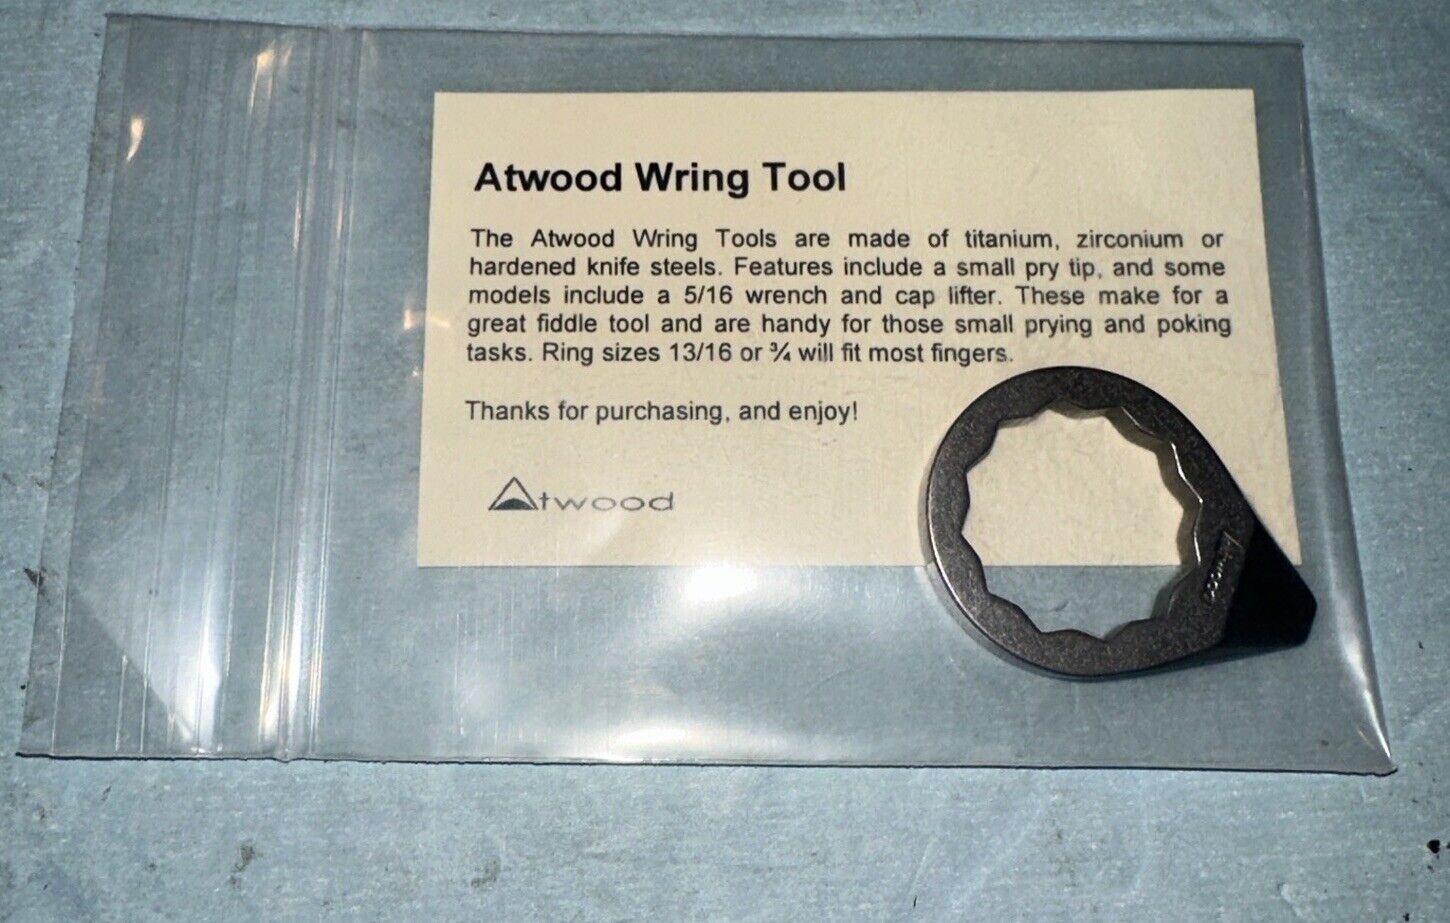 Peter Atwood Plain Titanium Wring Tool With Small Pry Tip NEW